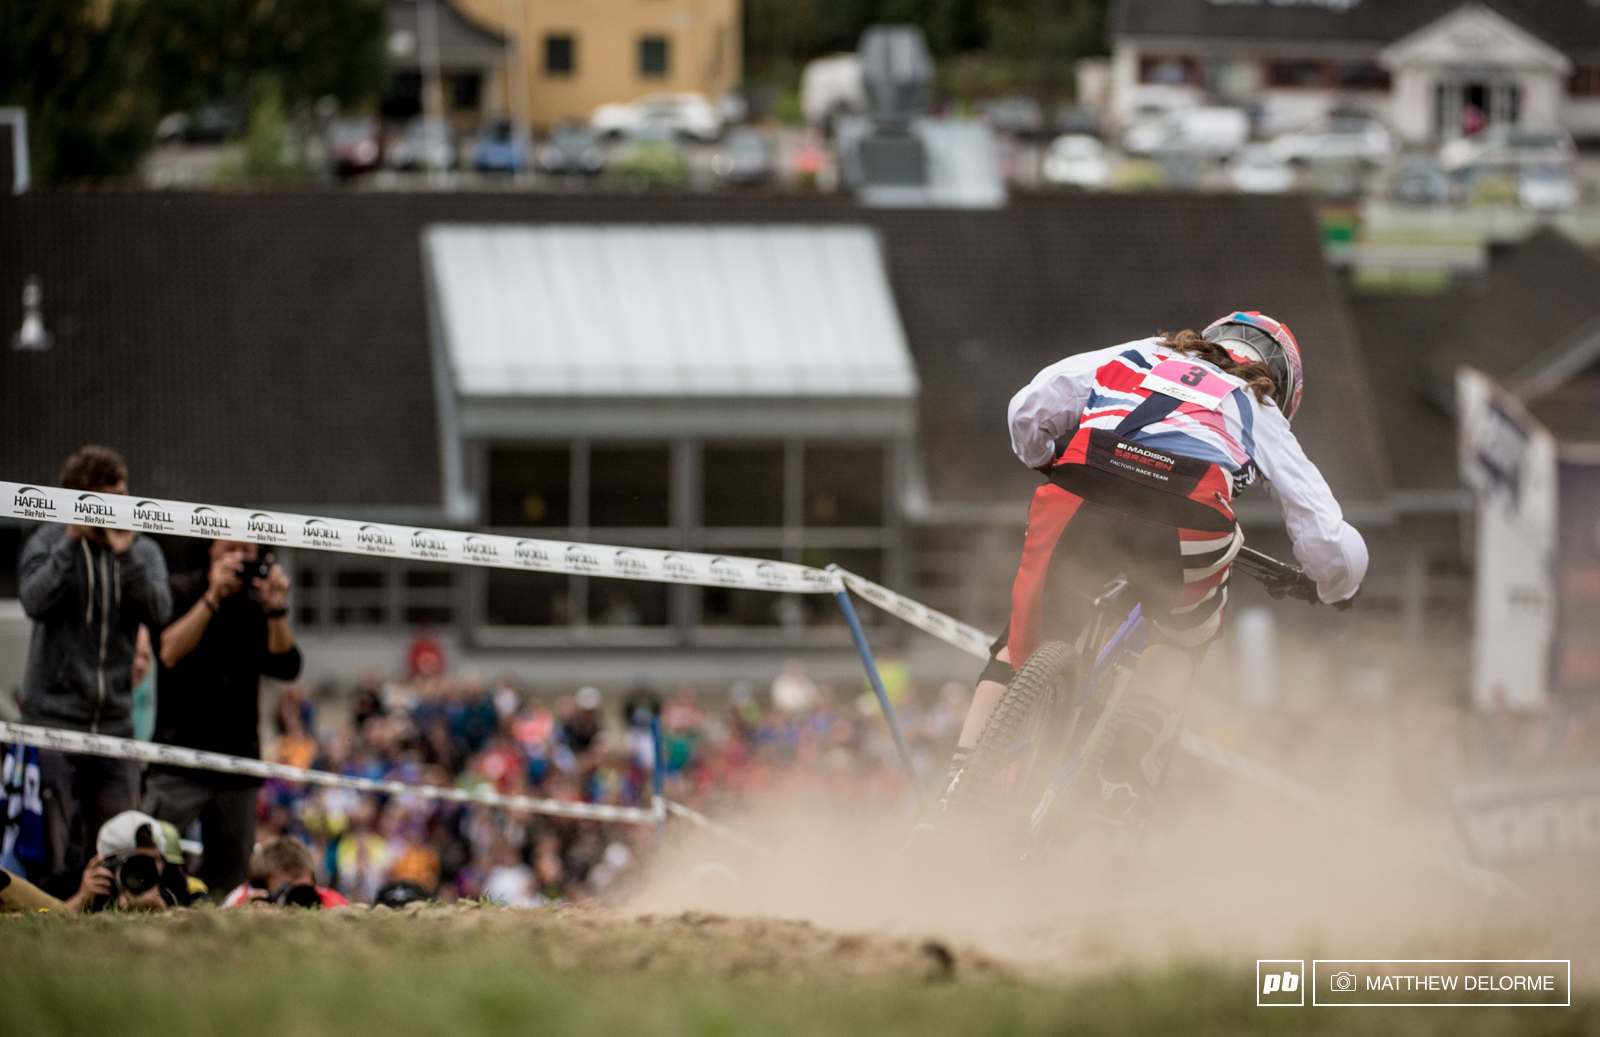 Manon Carpenter got on the gas today and edged out fellow Brit Rachel Atherton.